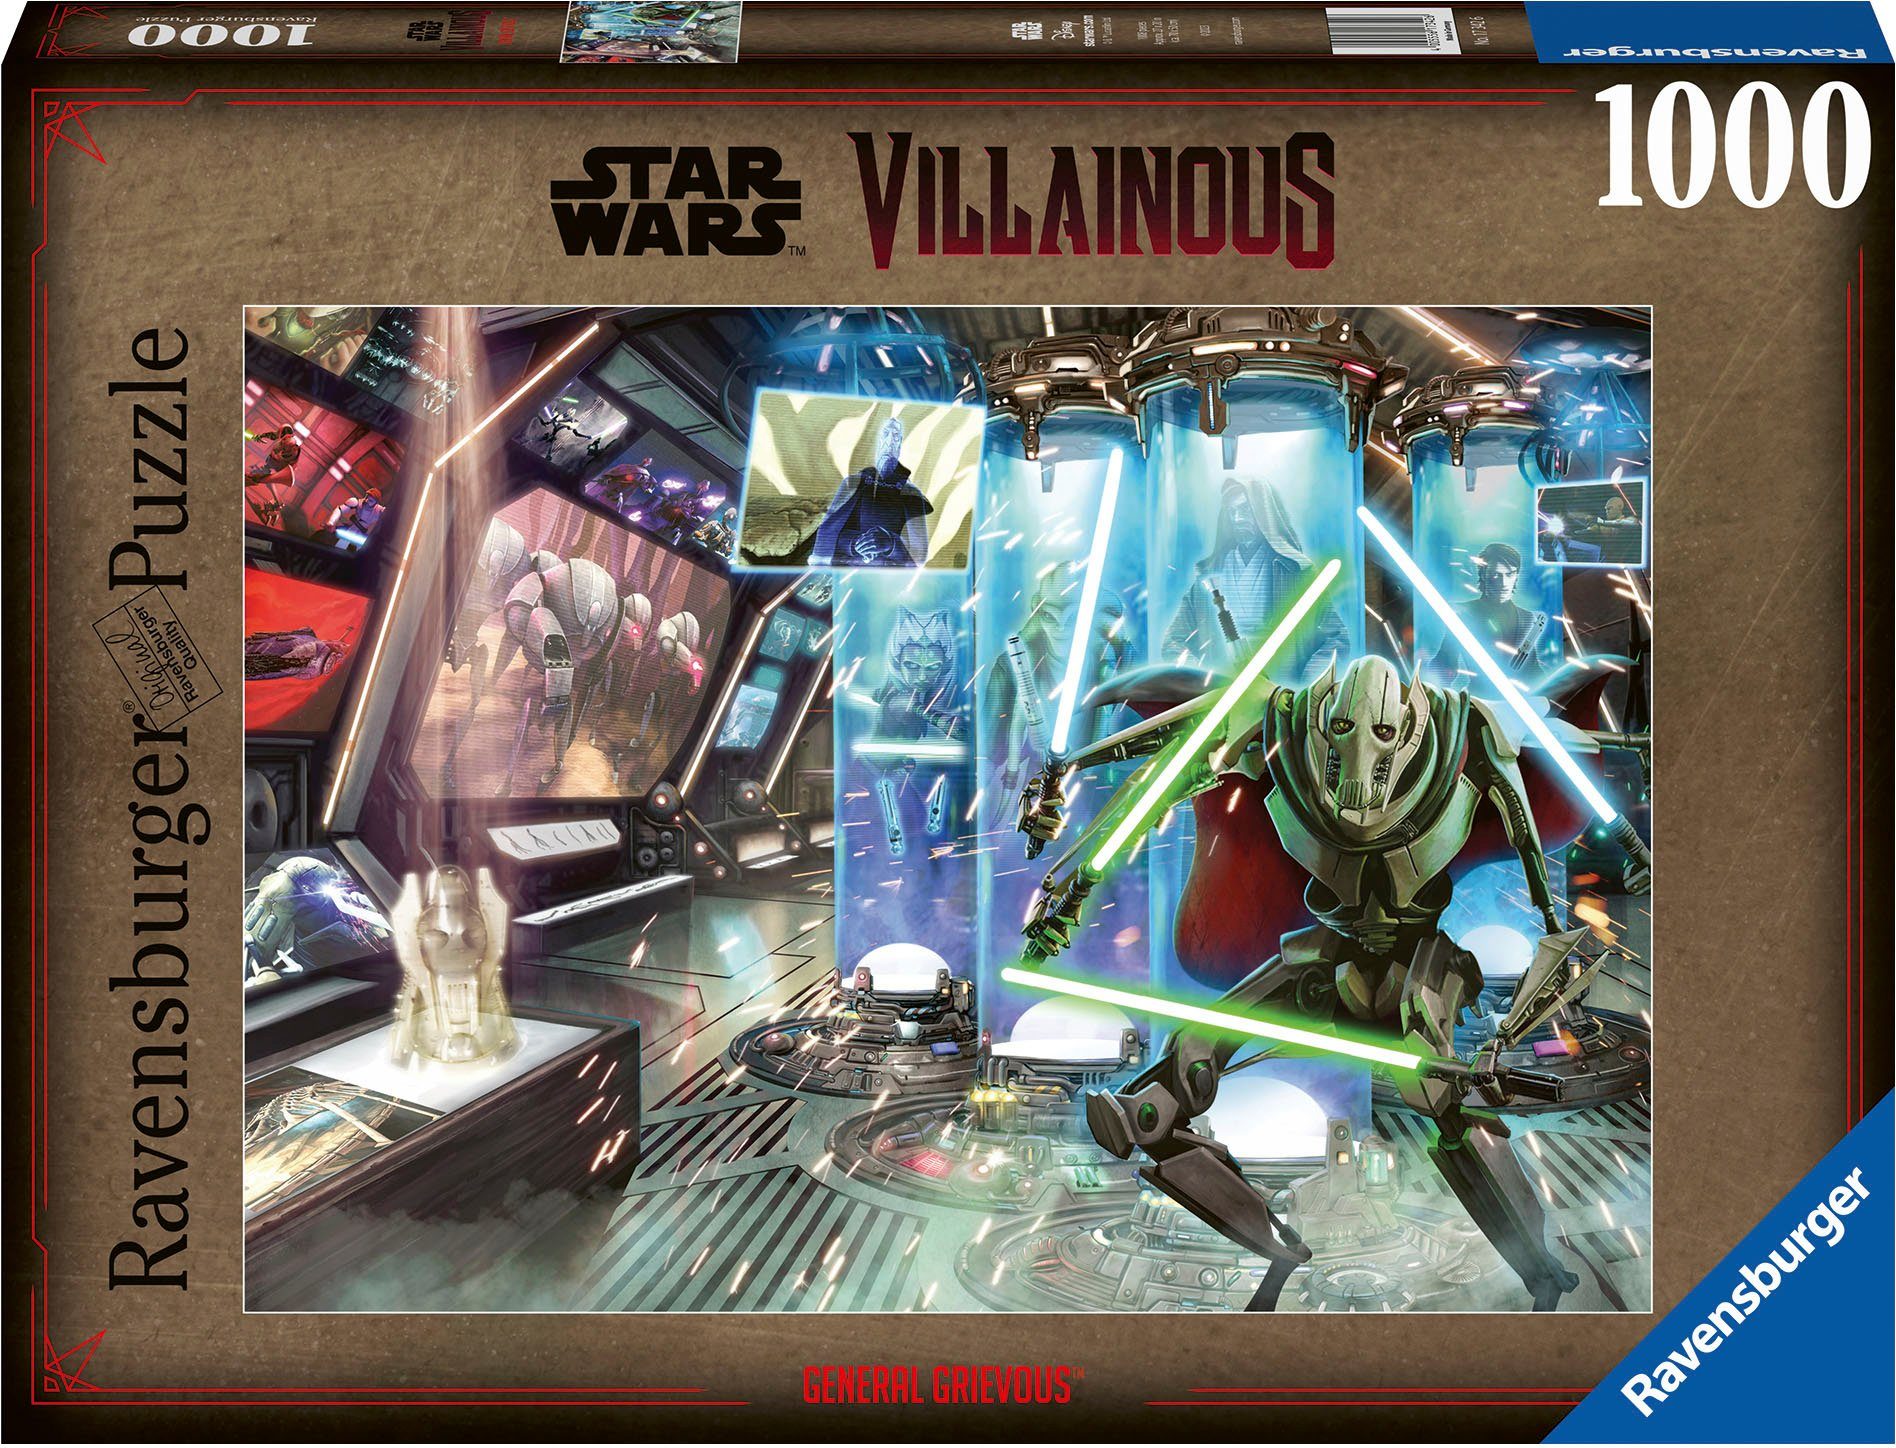 Ravensburger Puzzle Star Puzzleteile, Villainous, General Made 1000 in Grievous, Wars Germany